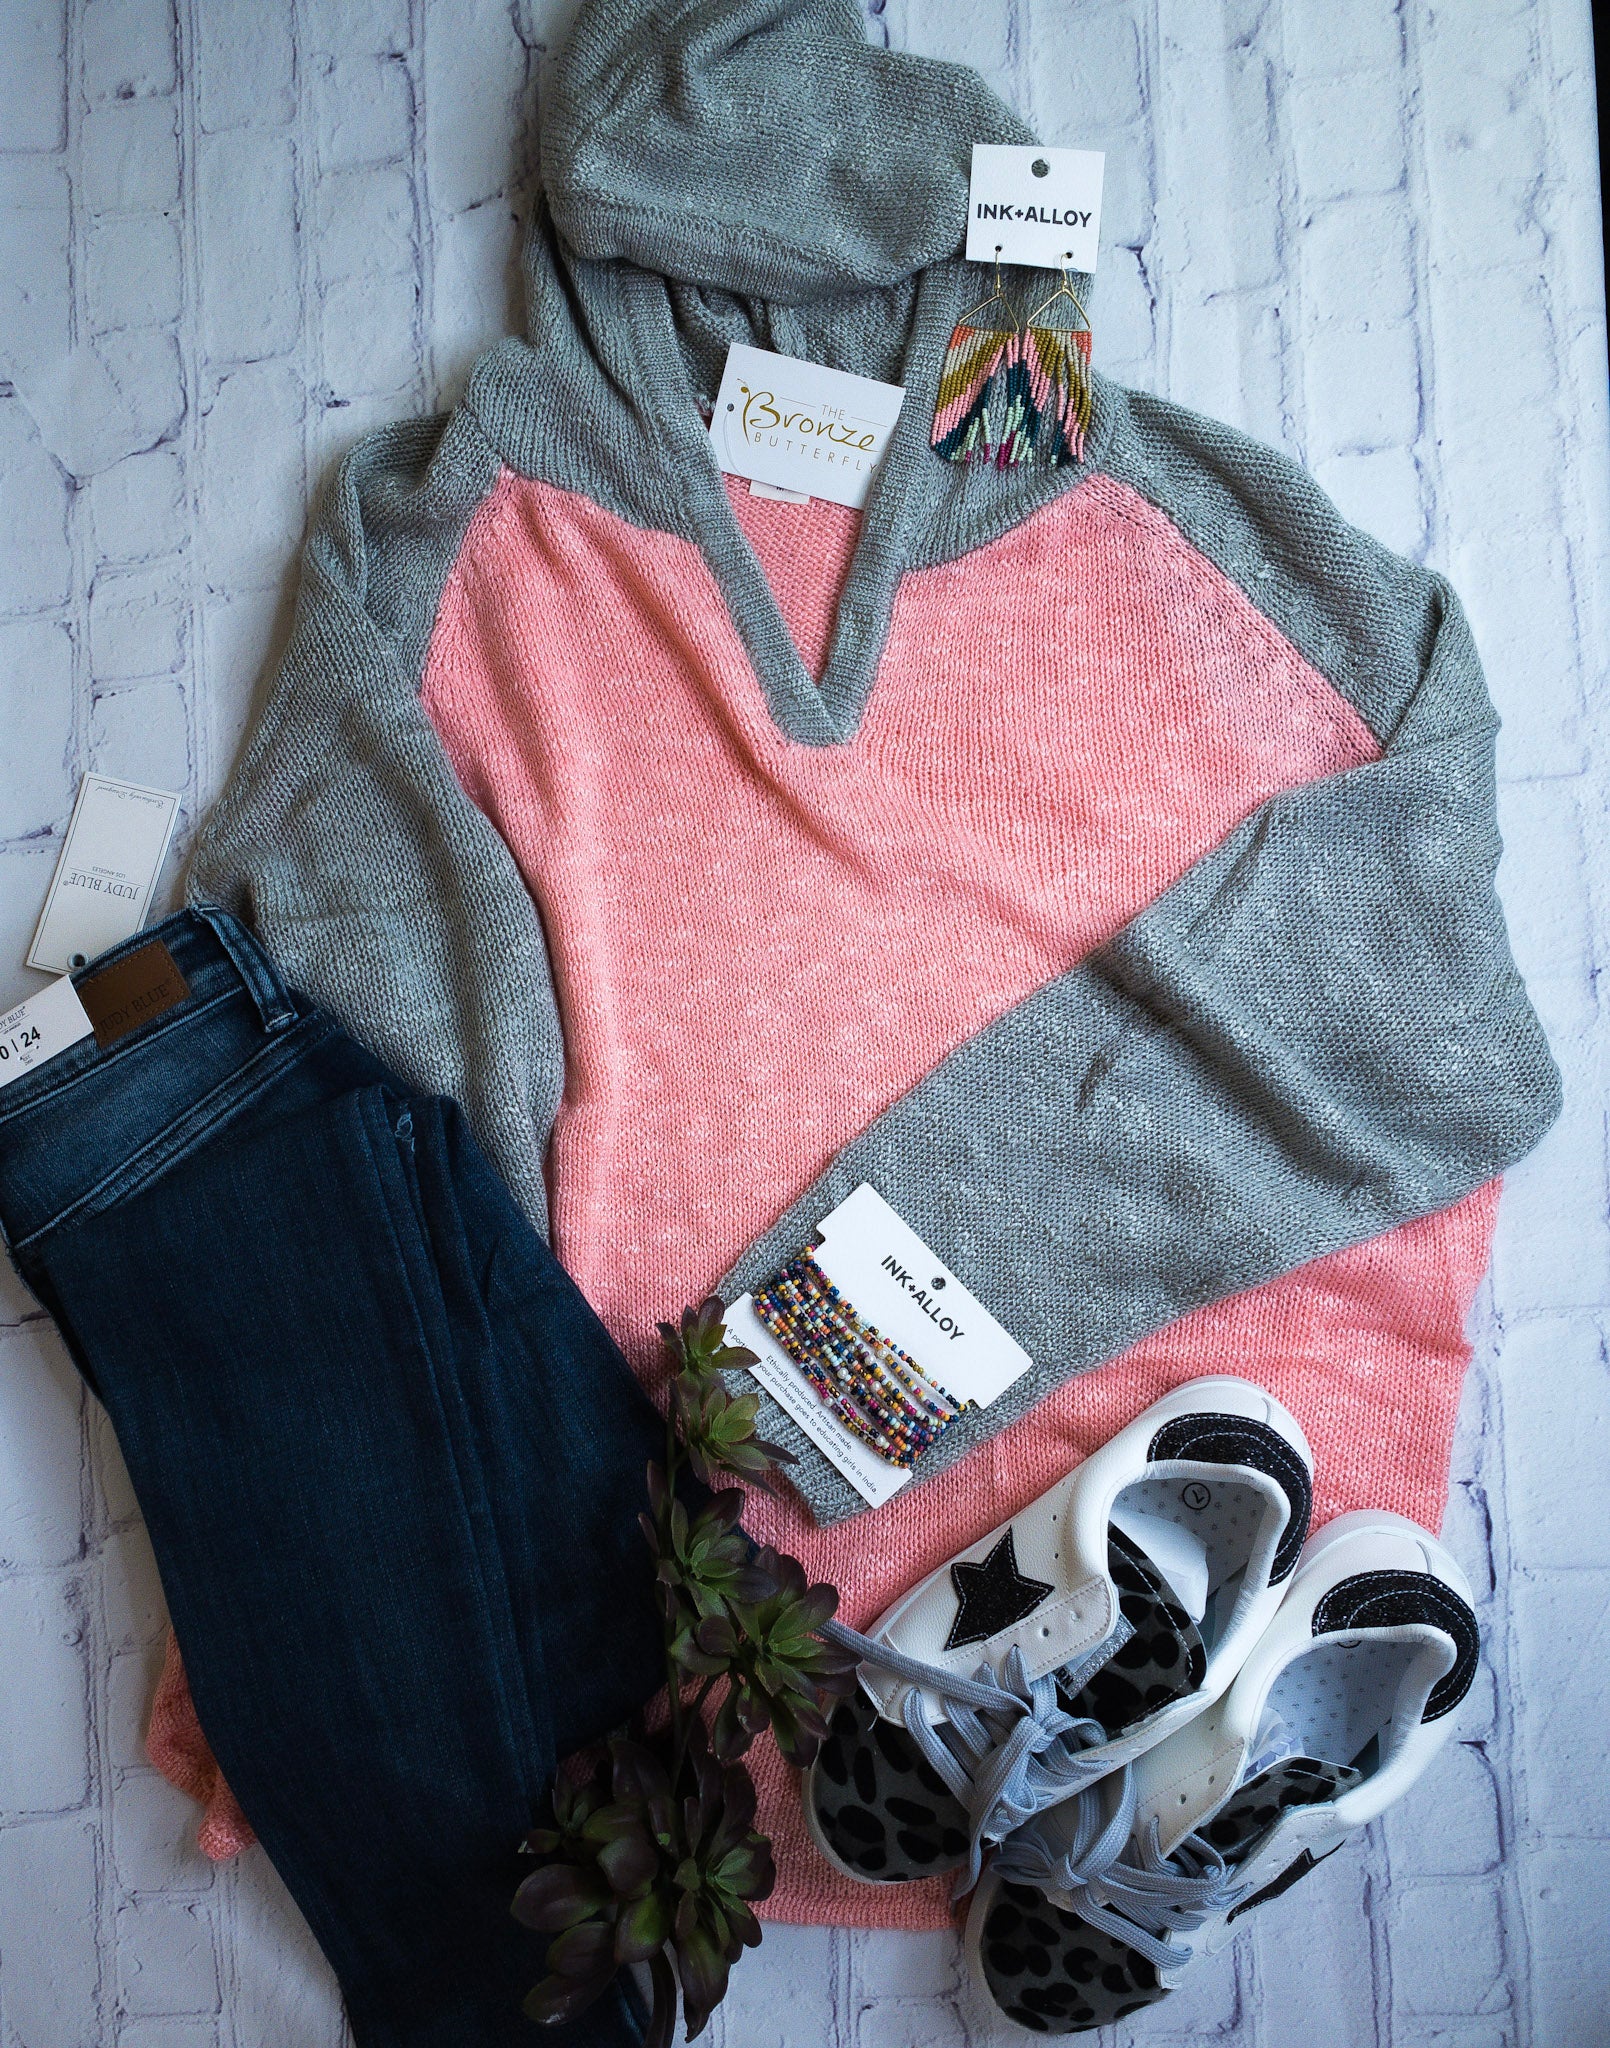 Loose knit blush hooded sweater.